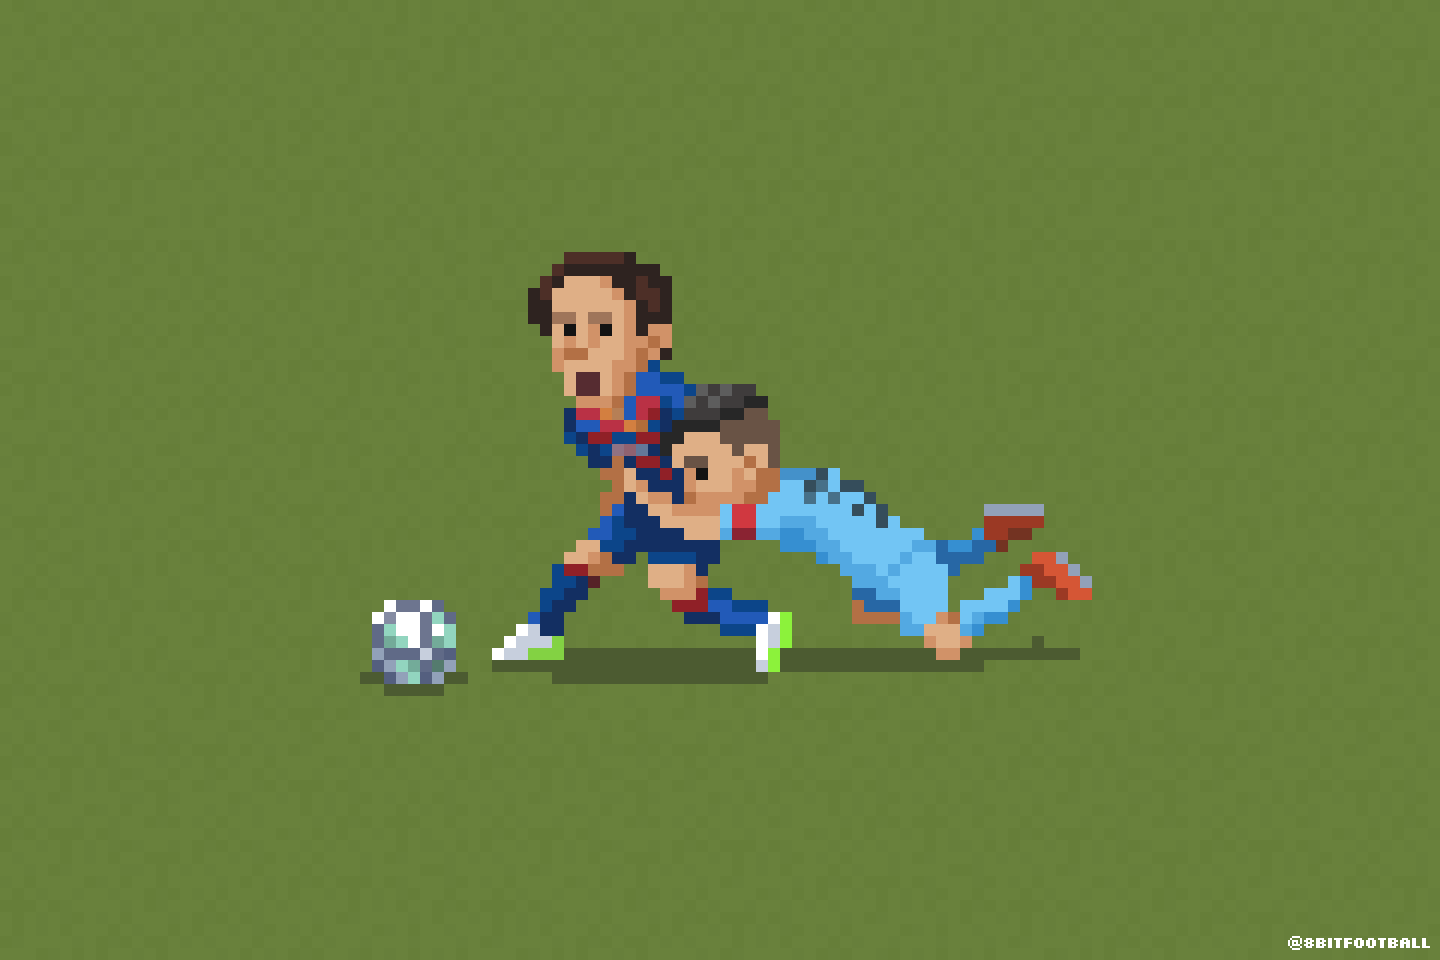 How to stop Messi?